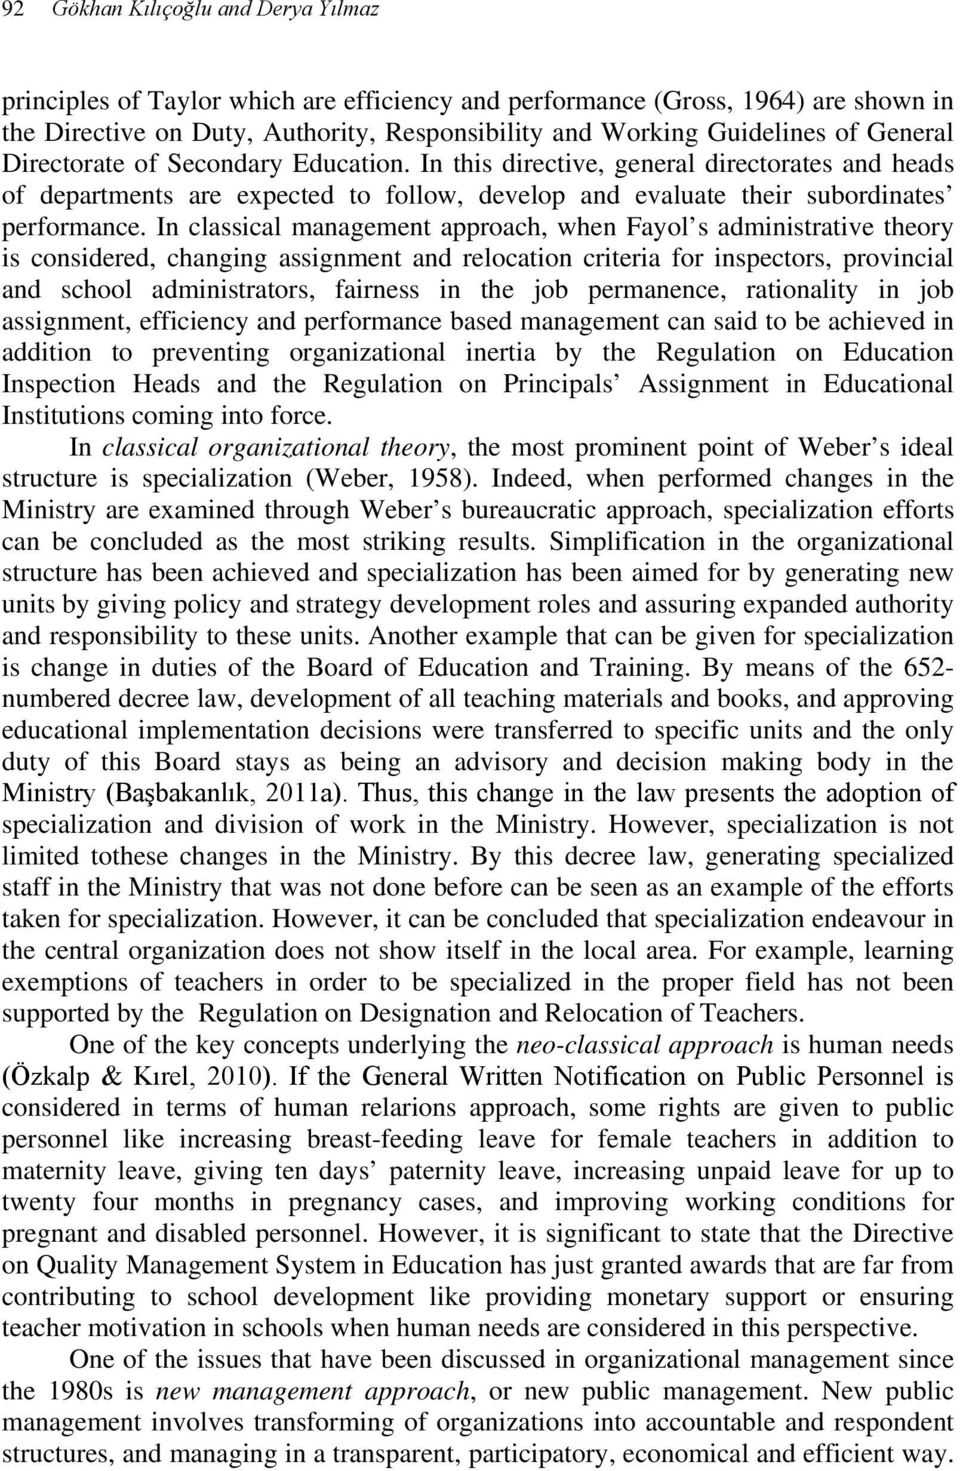 In classical management approach, when Fayol s administrative theory is considered, changing assignment and relocation criteria for inspectors, provincial and school administrators, fairness in the